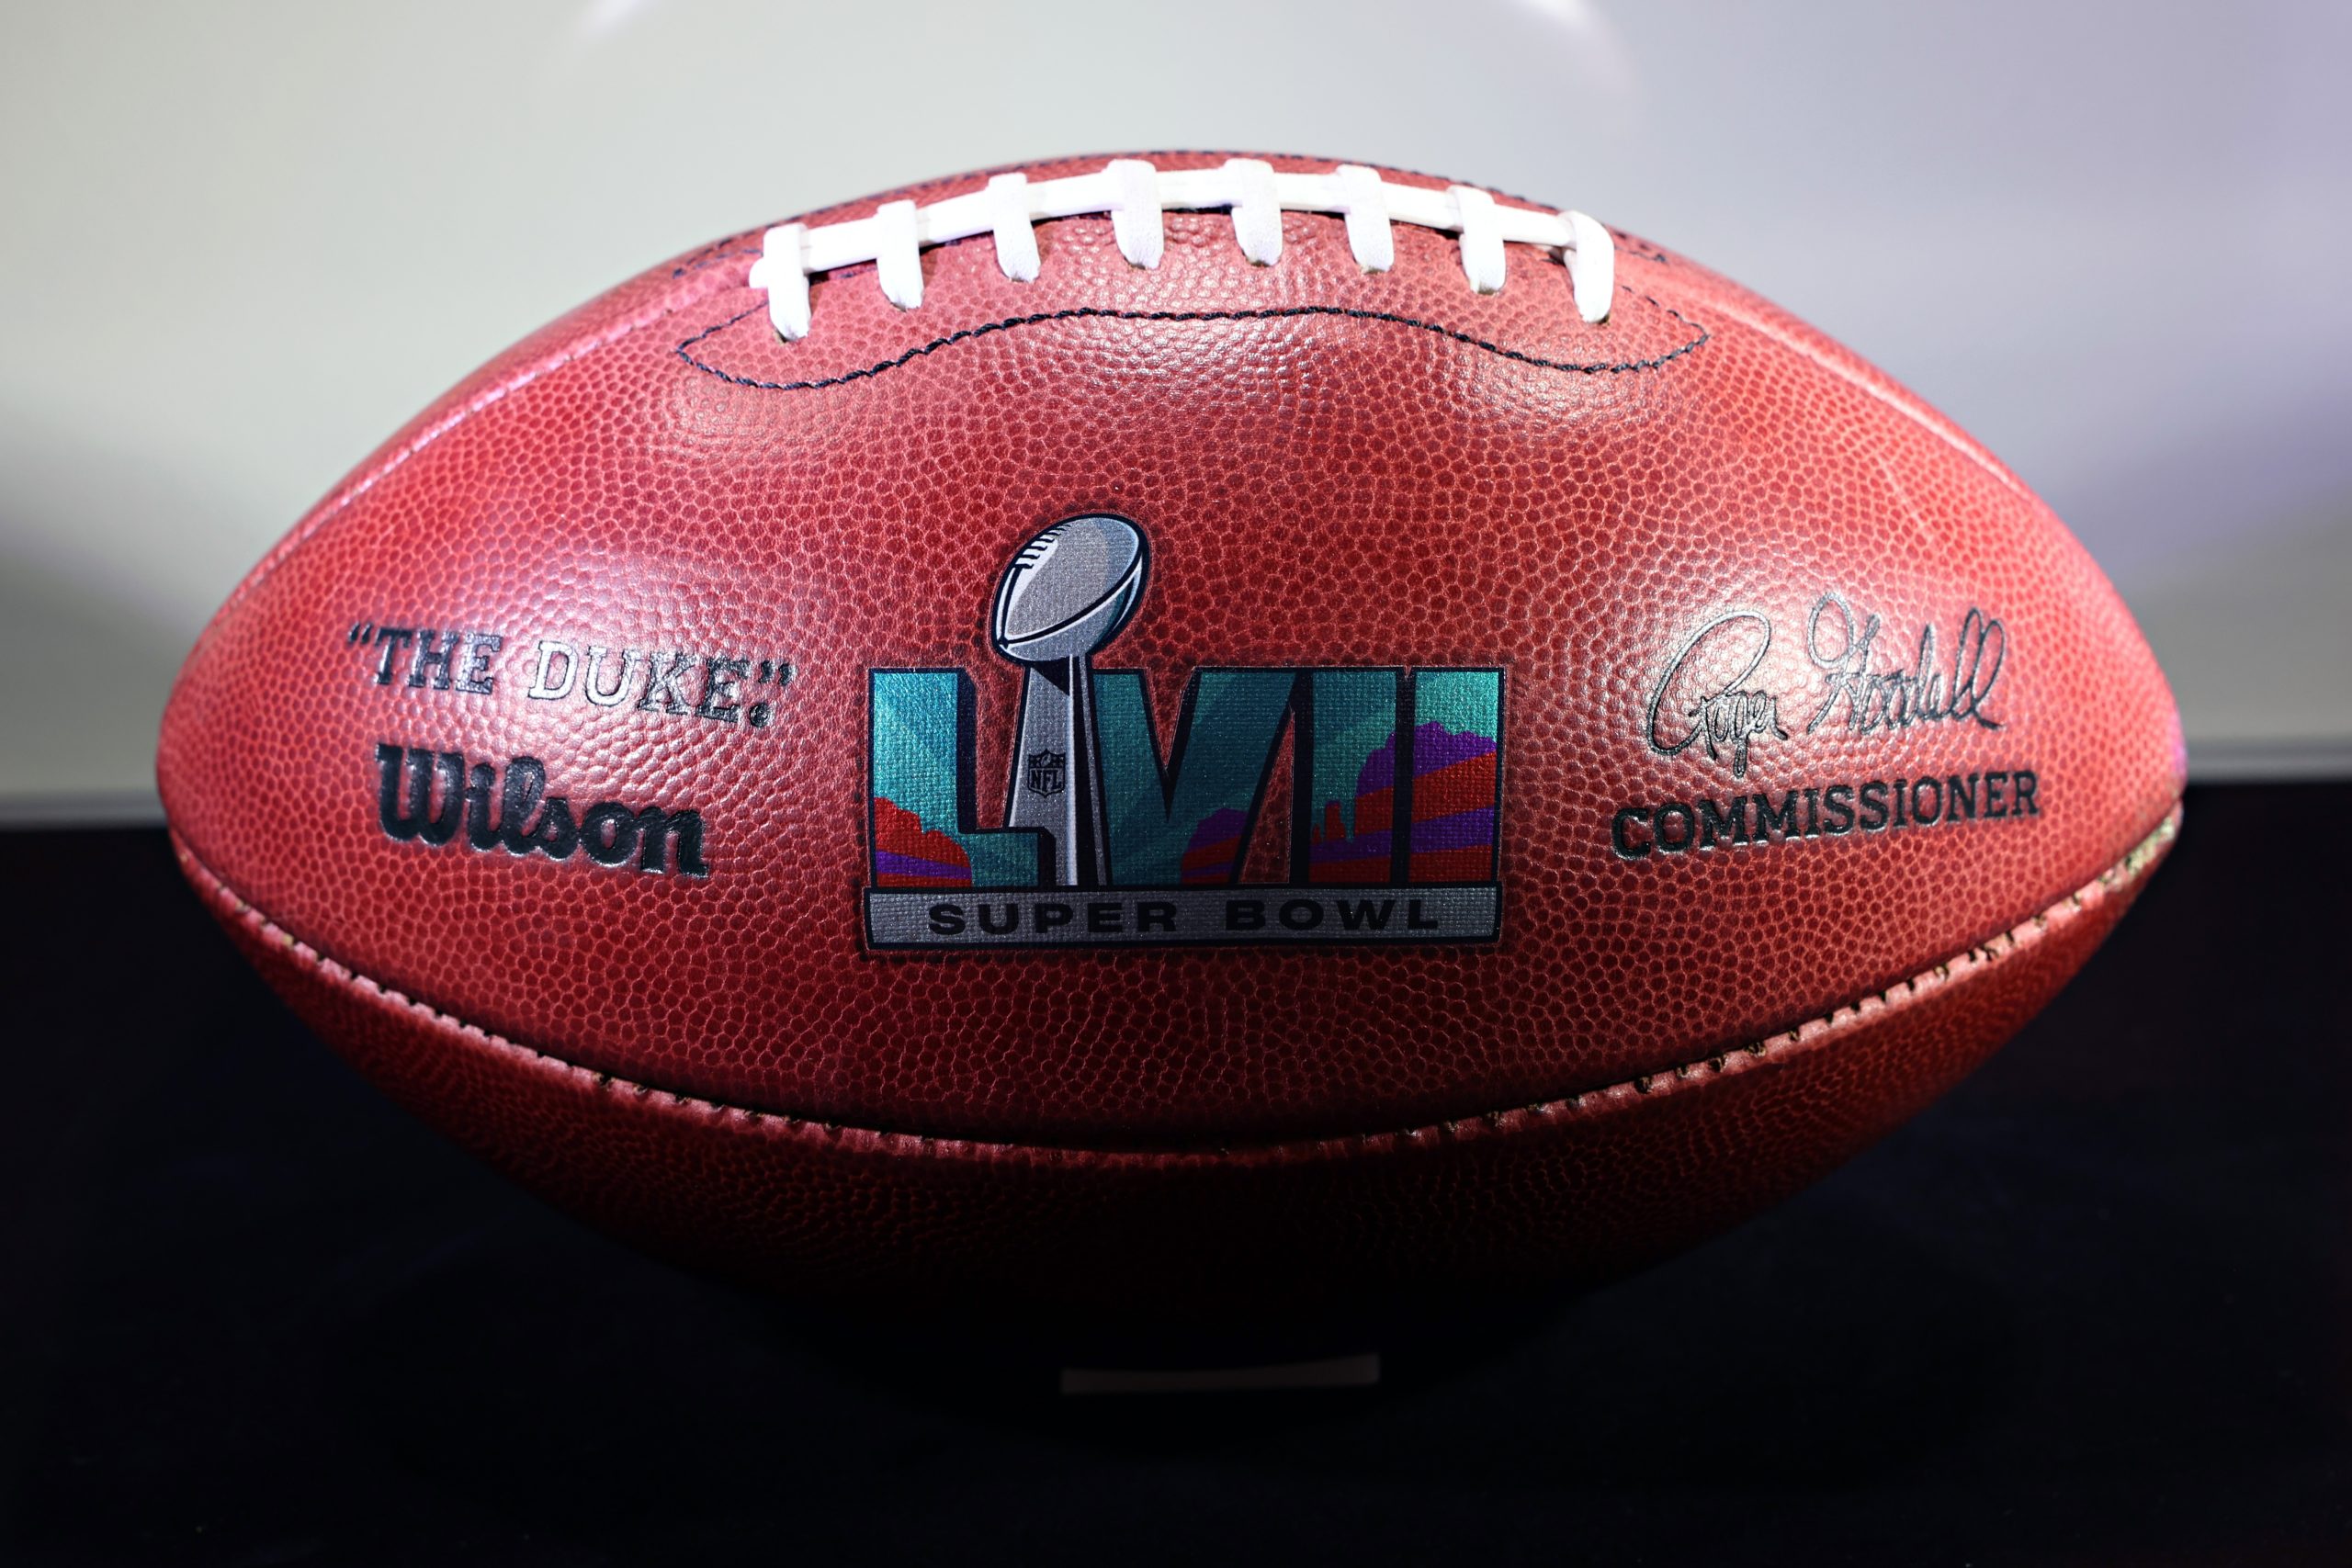 The Super Bowl LVII game-winning field goal football is on display during VICTORIAM, a special two-...